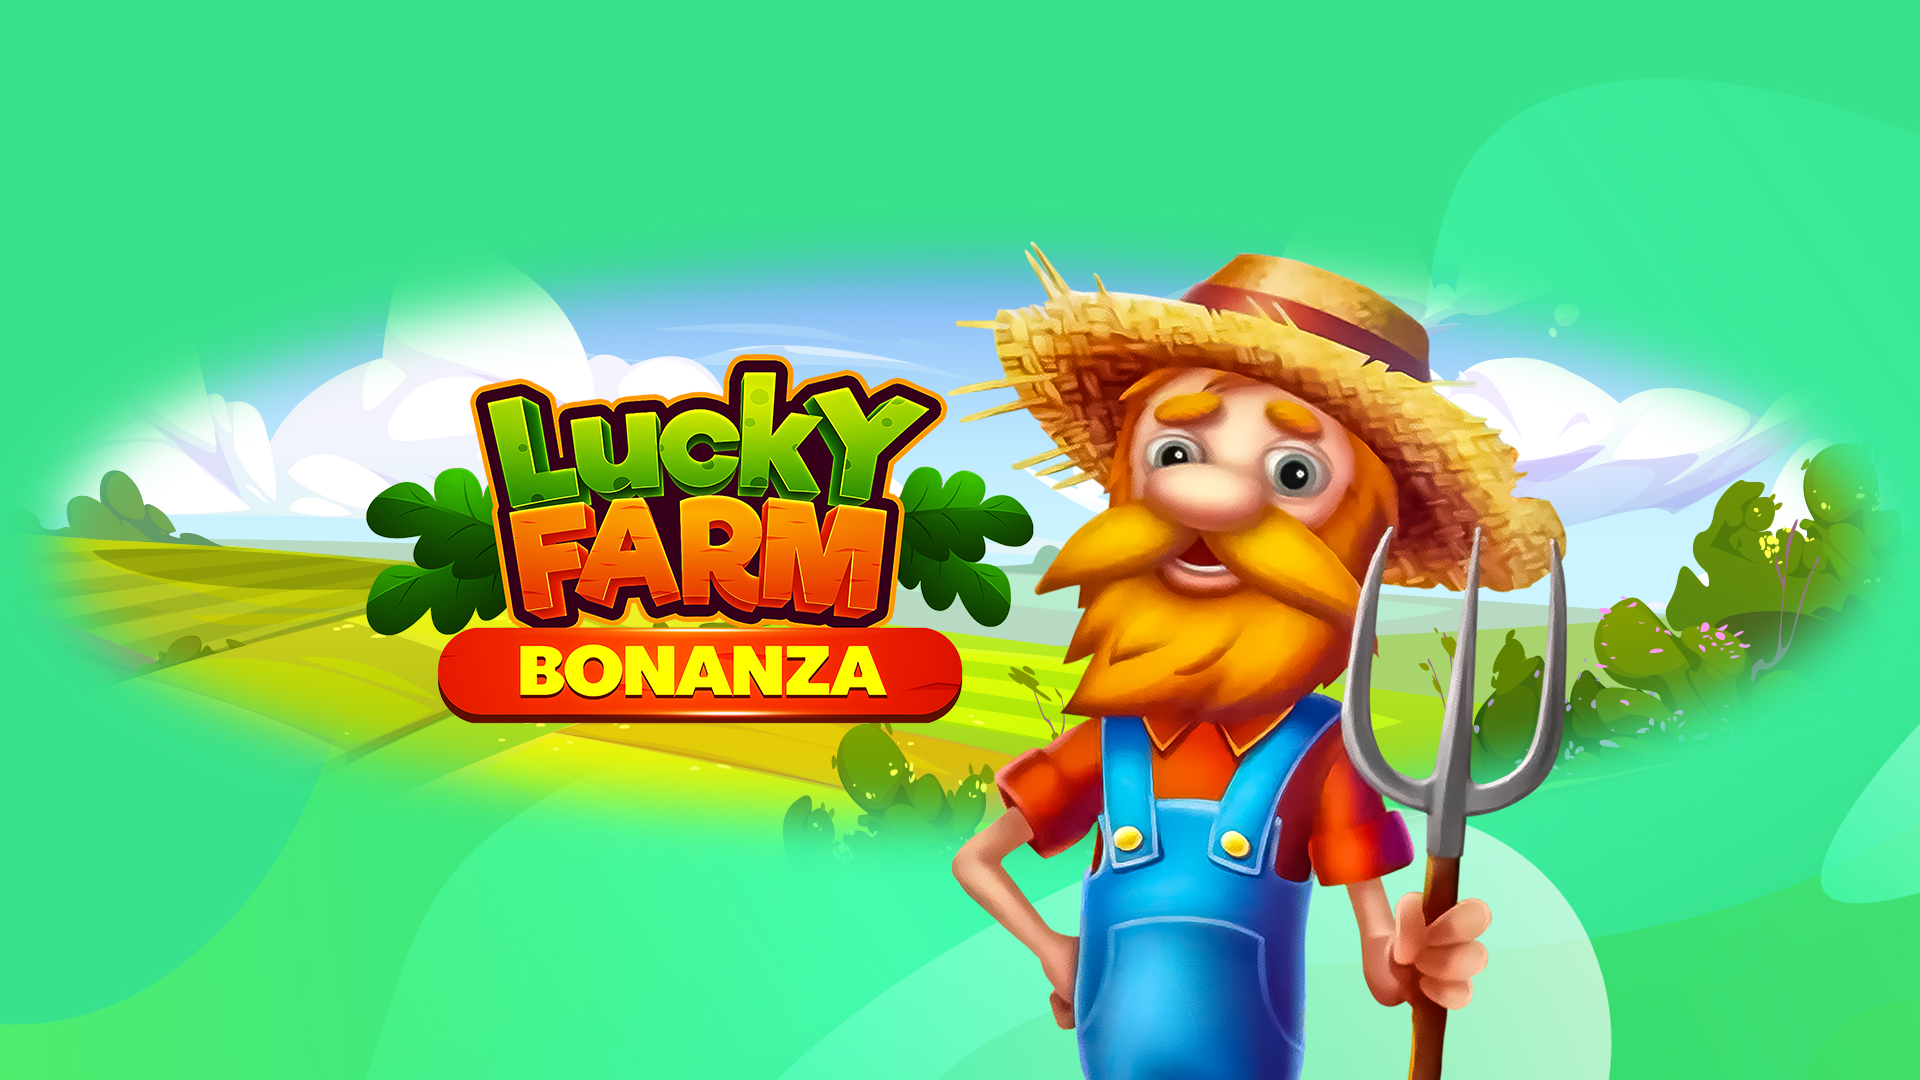 Animation of a farmer in front of a written lucky farm bonanza slot game title on a bright green background